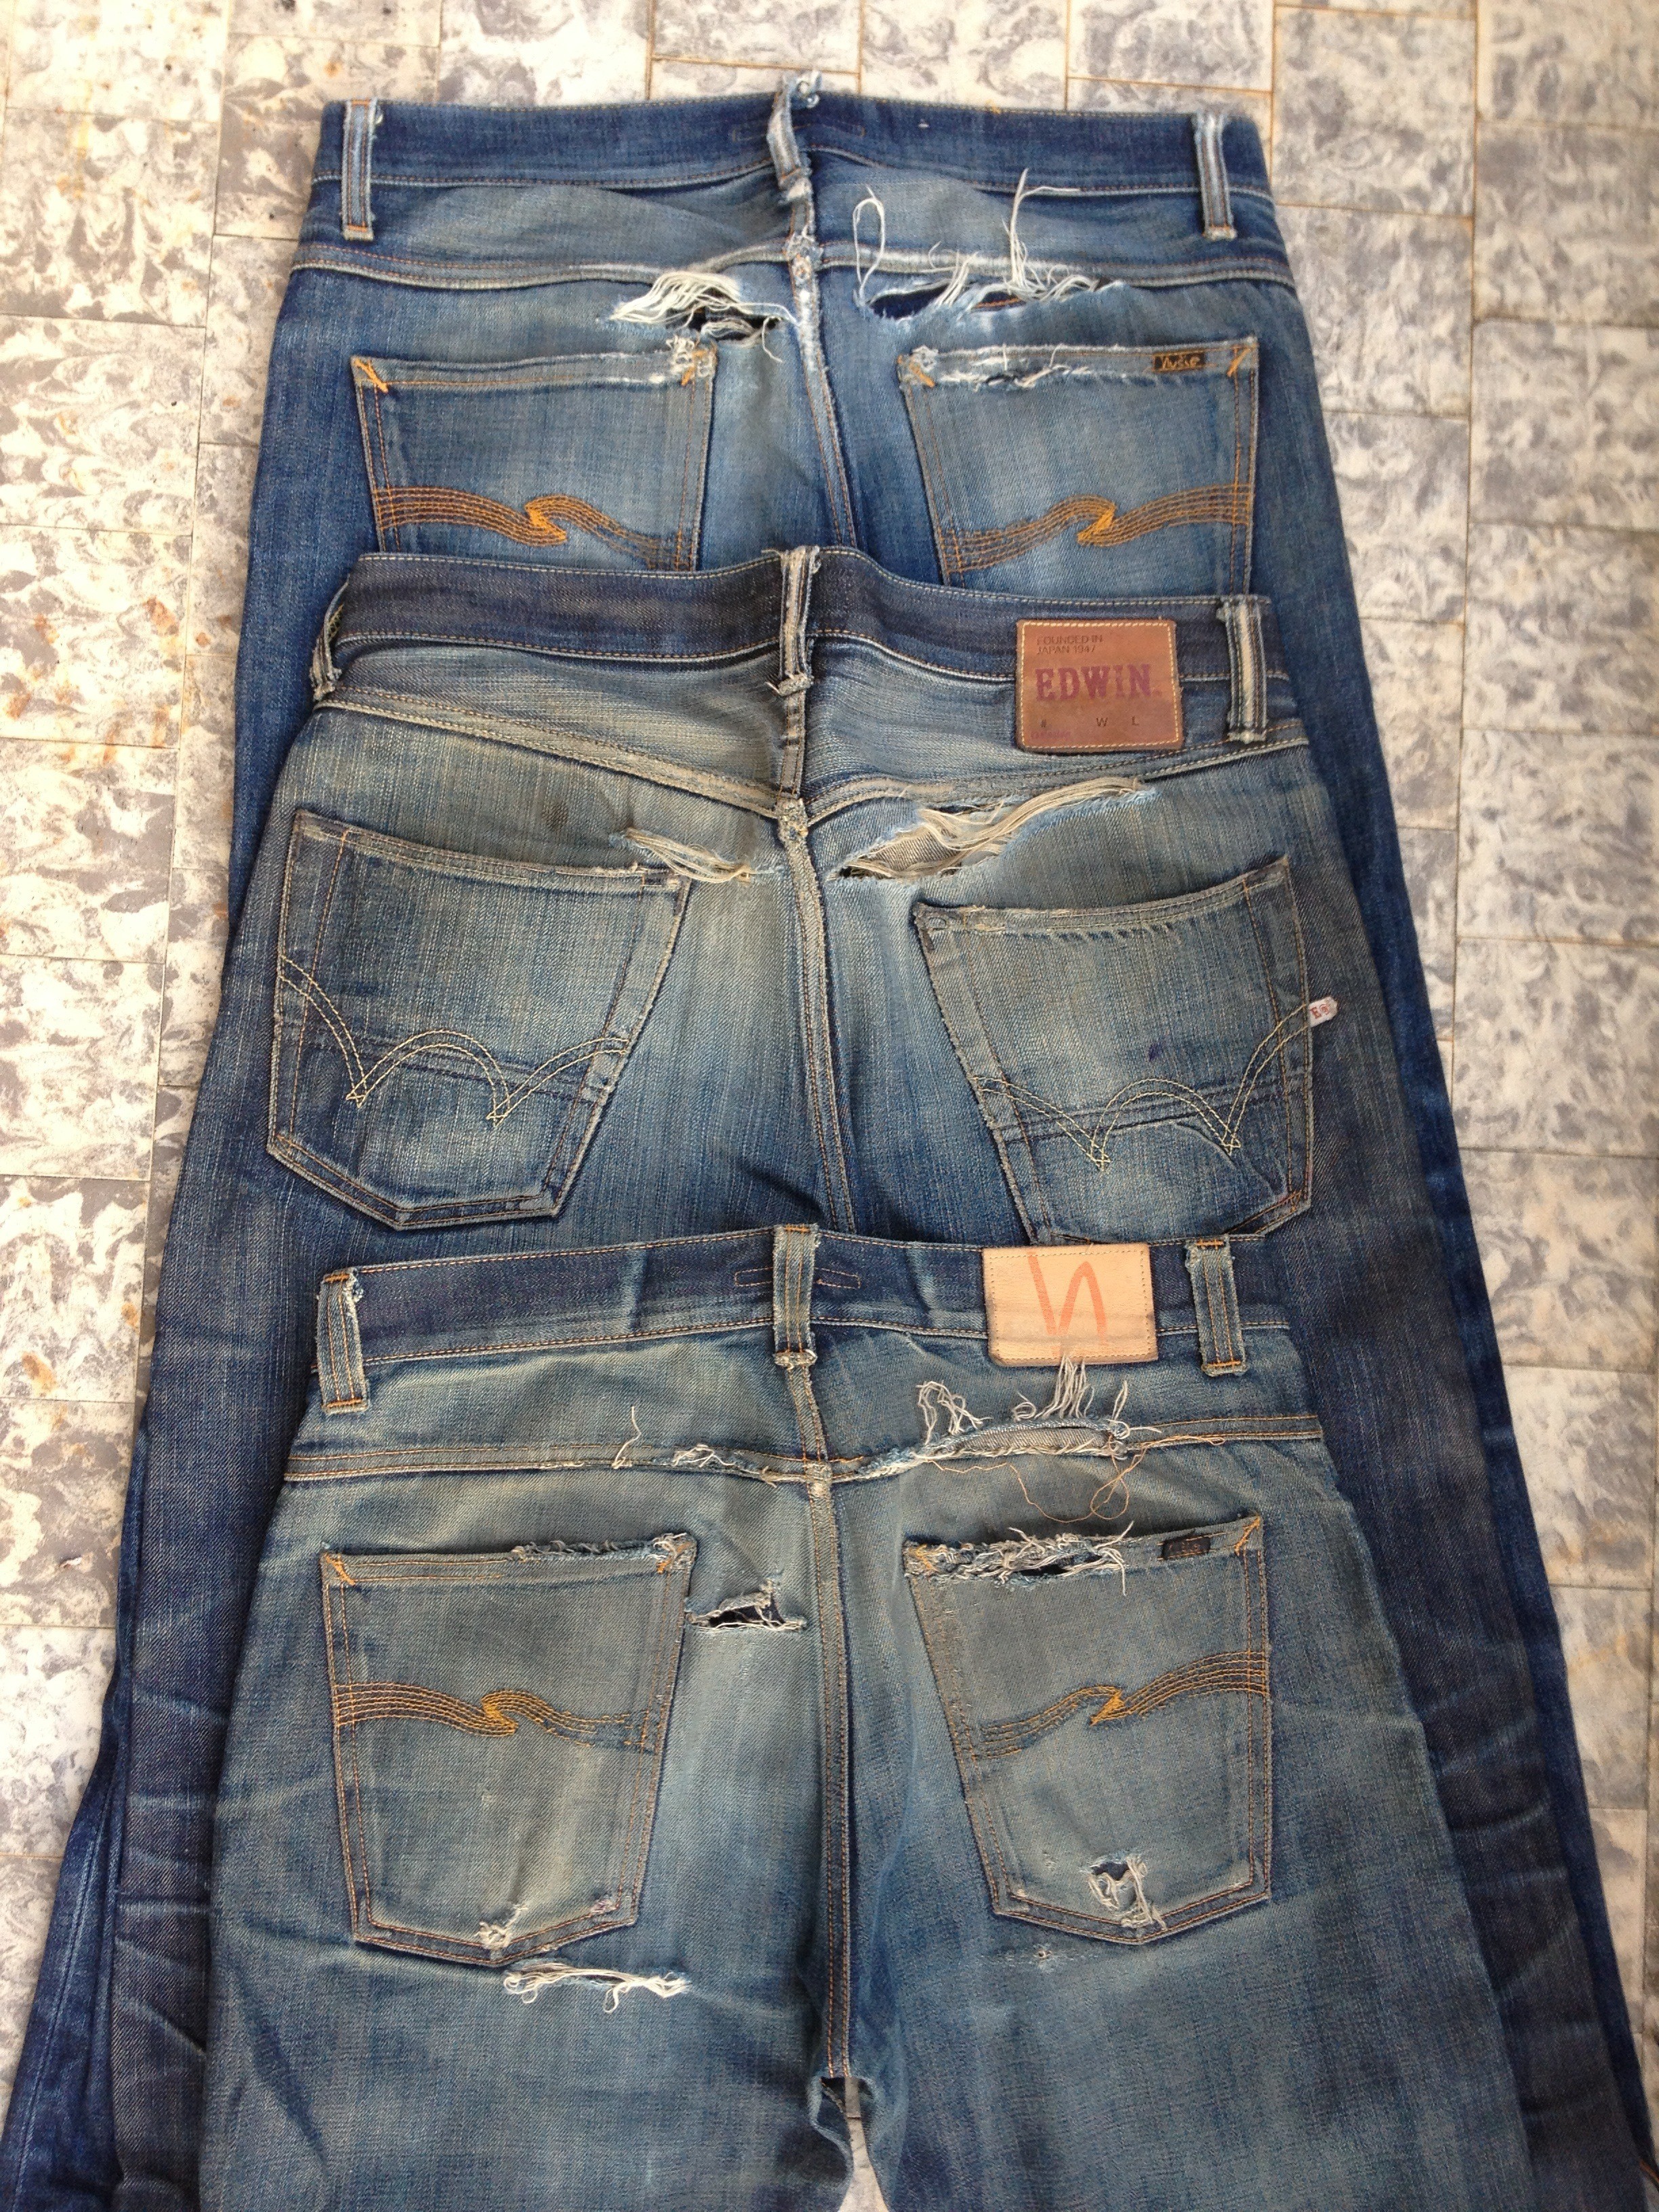 A Series Of Personal And Evolutionary Denim Fades